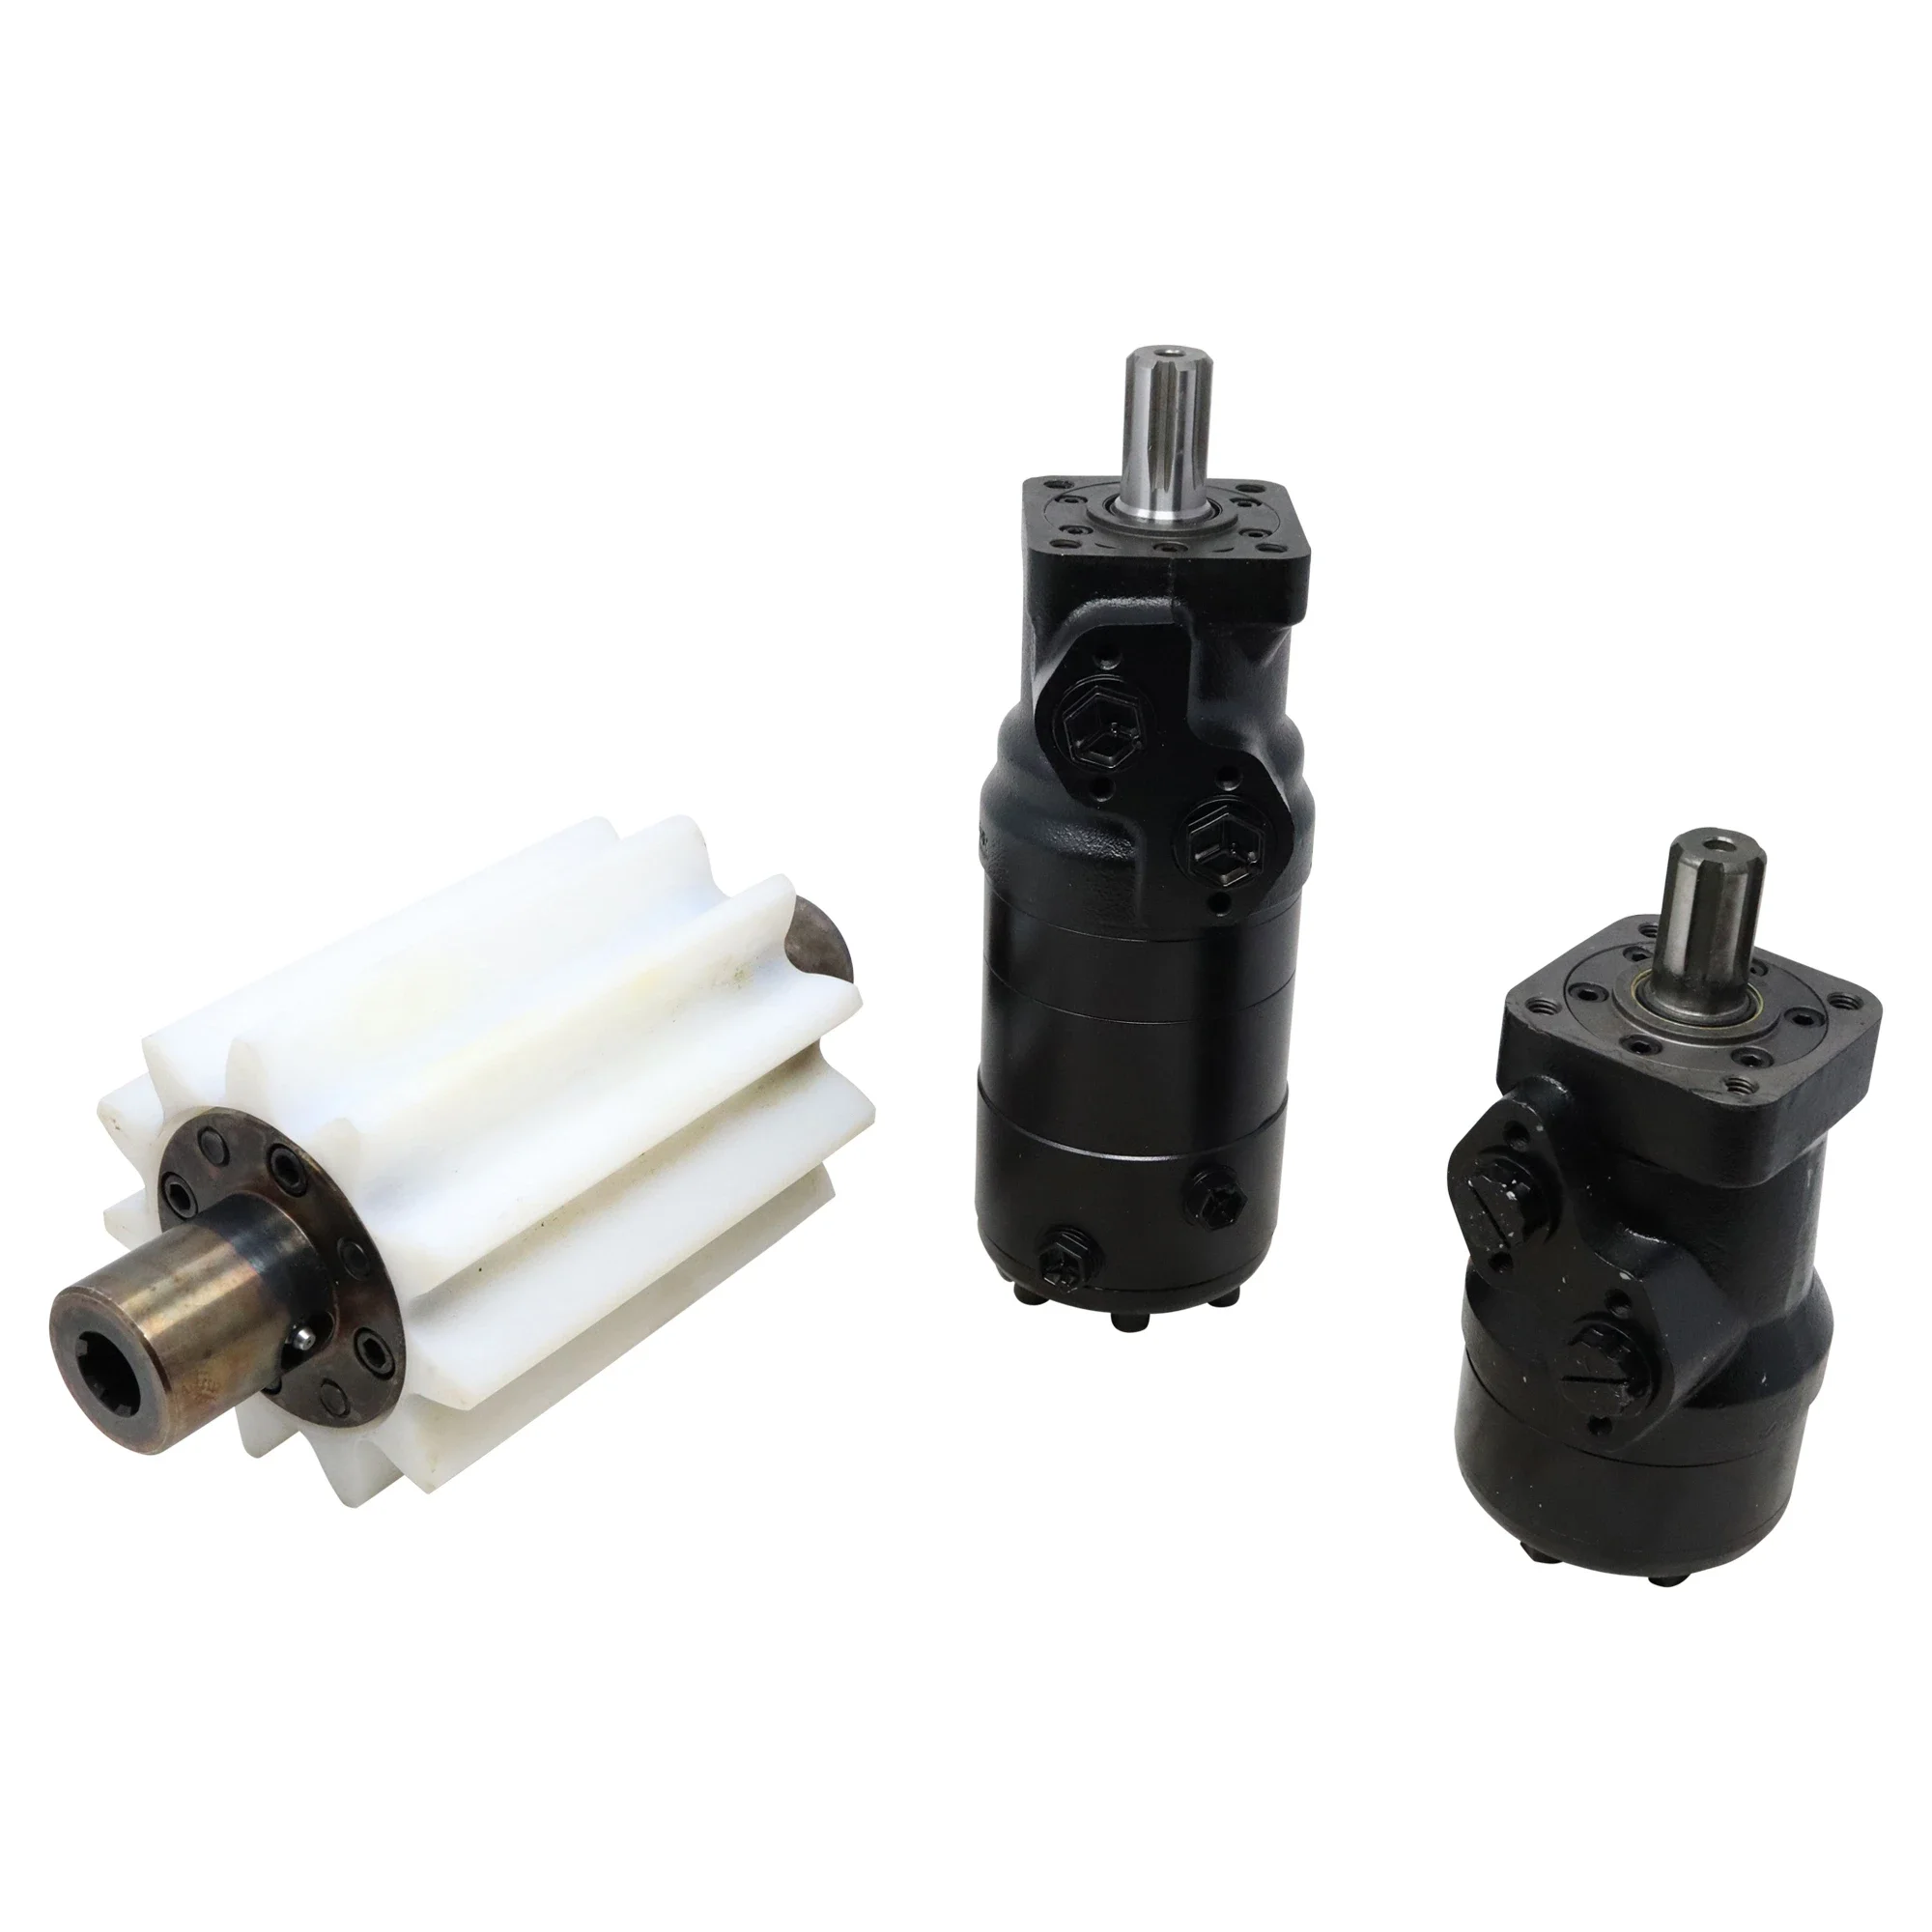 Wastebuilt® Replacement for McNeilus Motor and Gear Kit